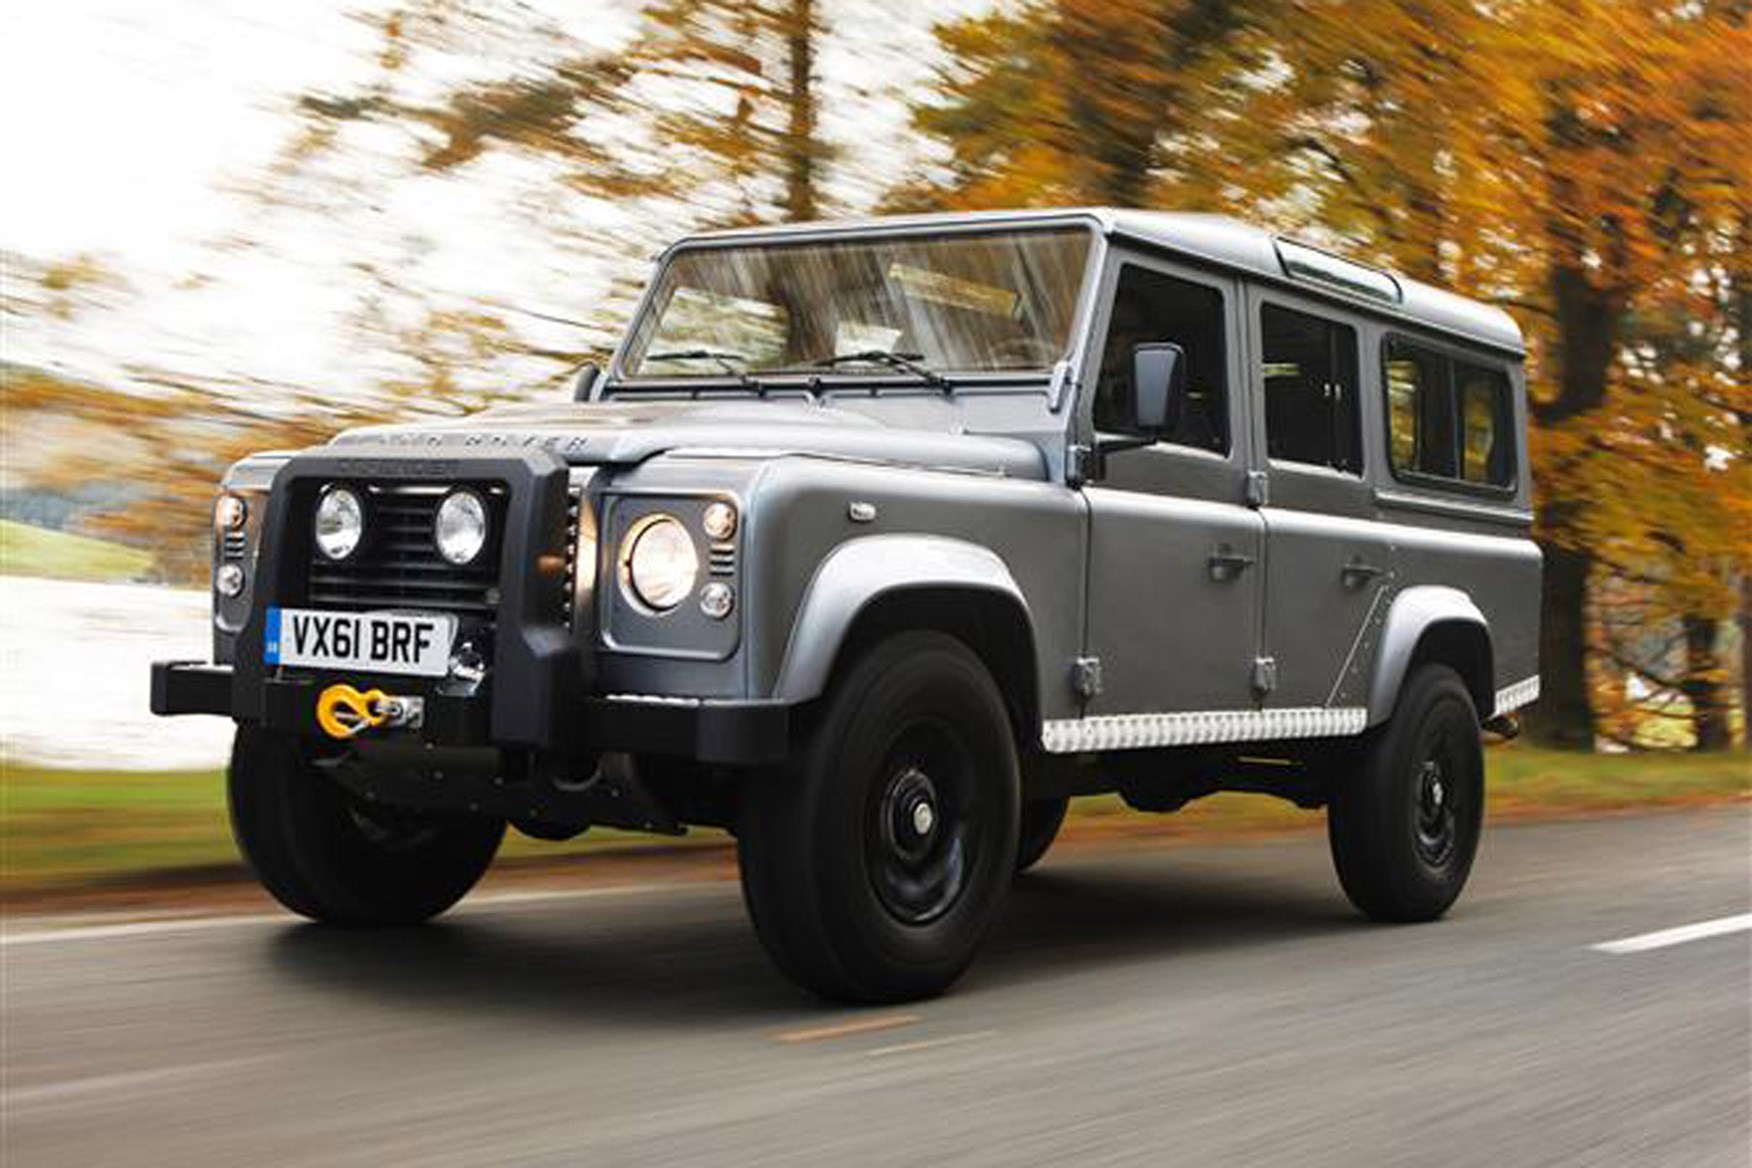 Land Rover Defender 2007-2016 review on Parkers Vans - 110 exterior